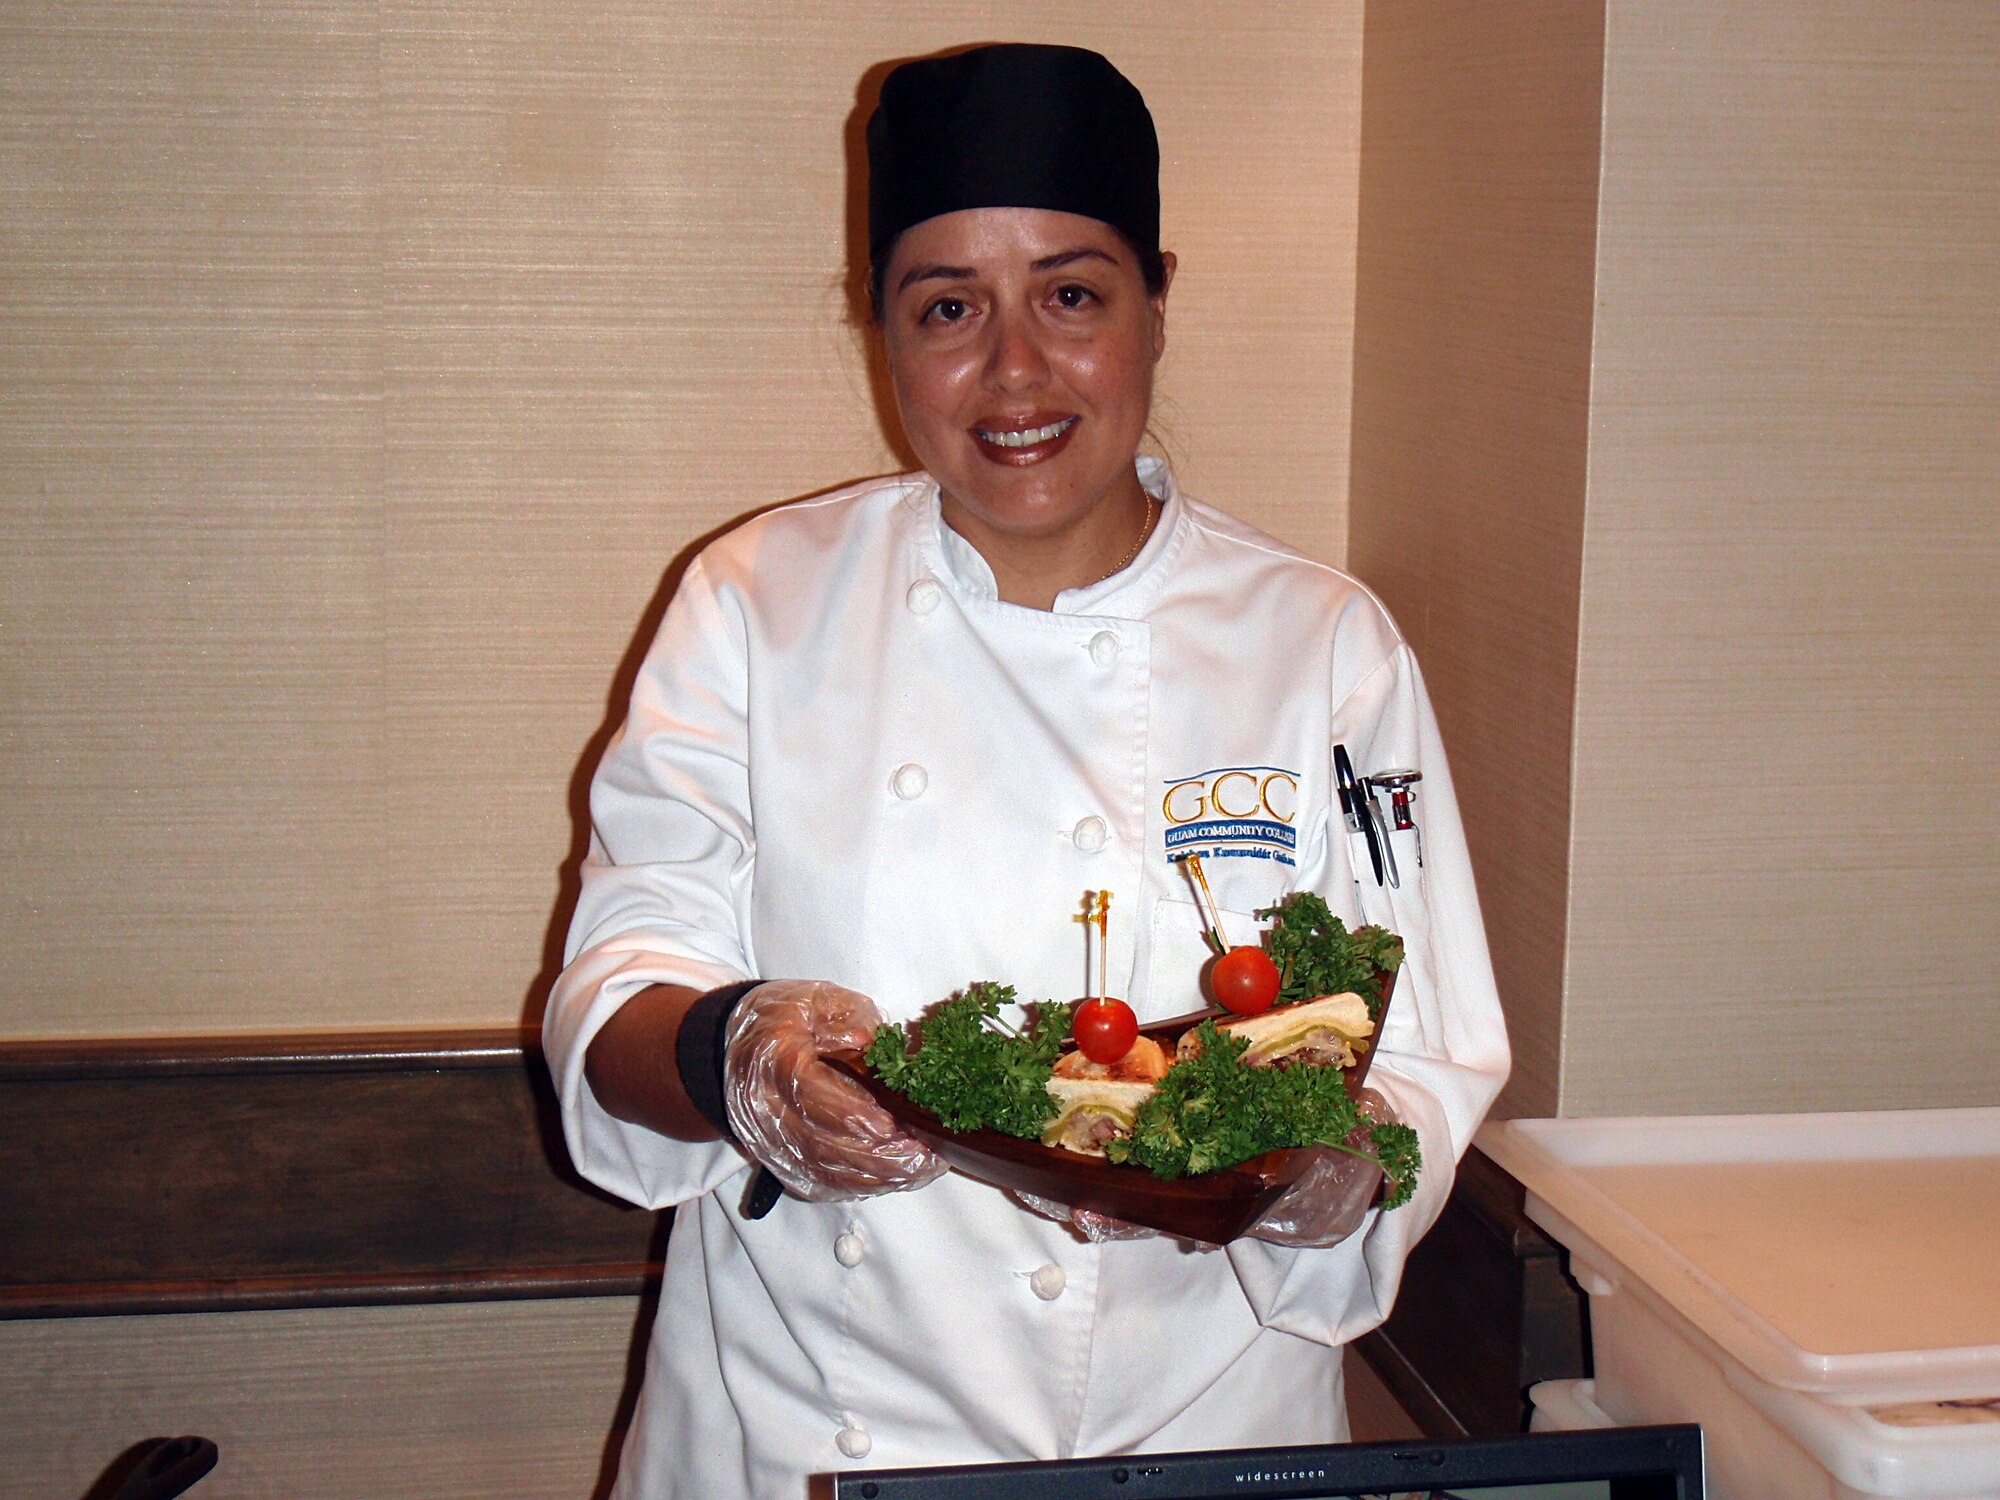 Mrs. Sheila Delagdillo was recently selected to represent Guam Community College at the 11th Annual Pacific Hotel and Restaurant Expo Culinary Arts Competition held at Hyatt Regency Hotel. She showed off her talents making a Cubano Isleno Sandwich. Mrs. Delagdillo will be the first dislocated worker program participant to graduate with an Associate of Arts degree in Culinary Arts in December. (Courtesy photo)